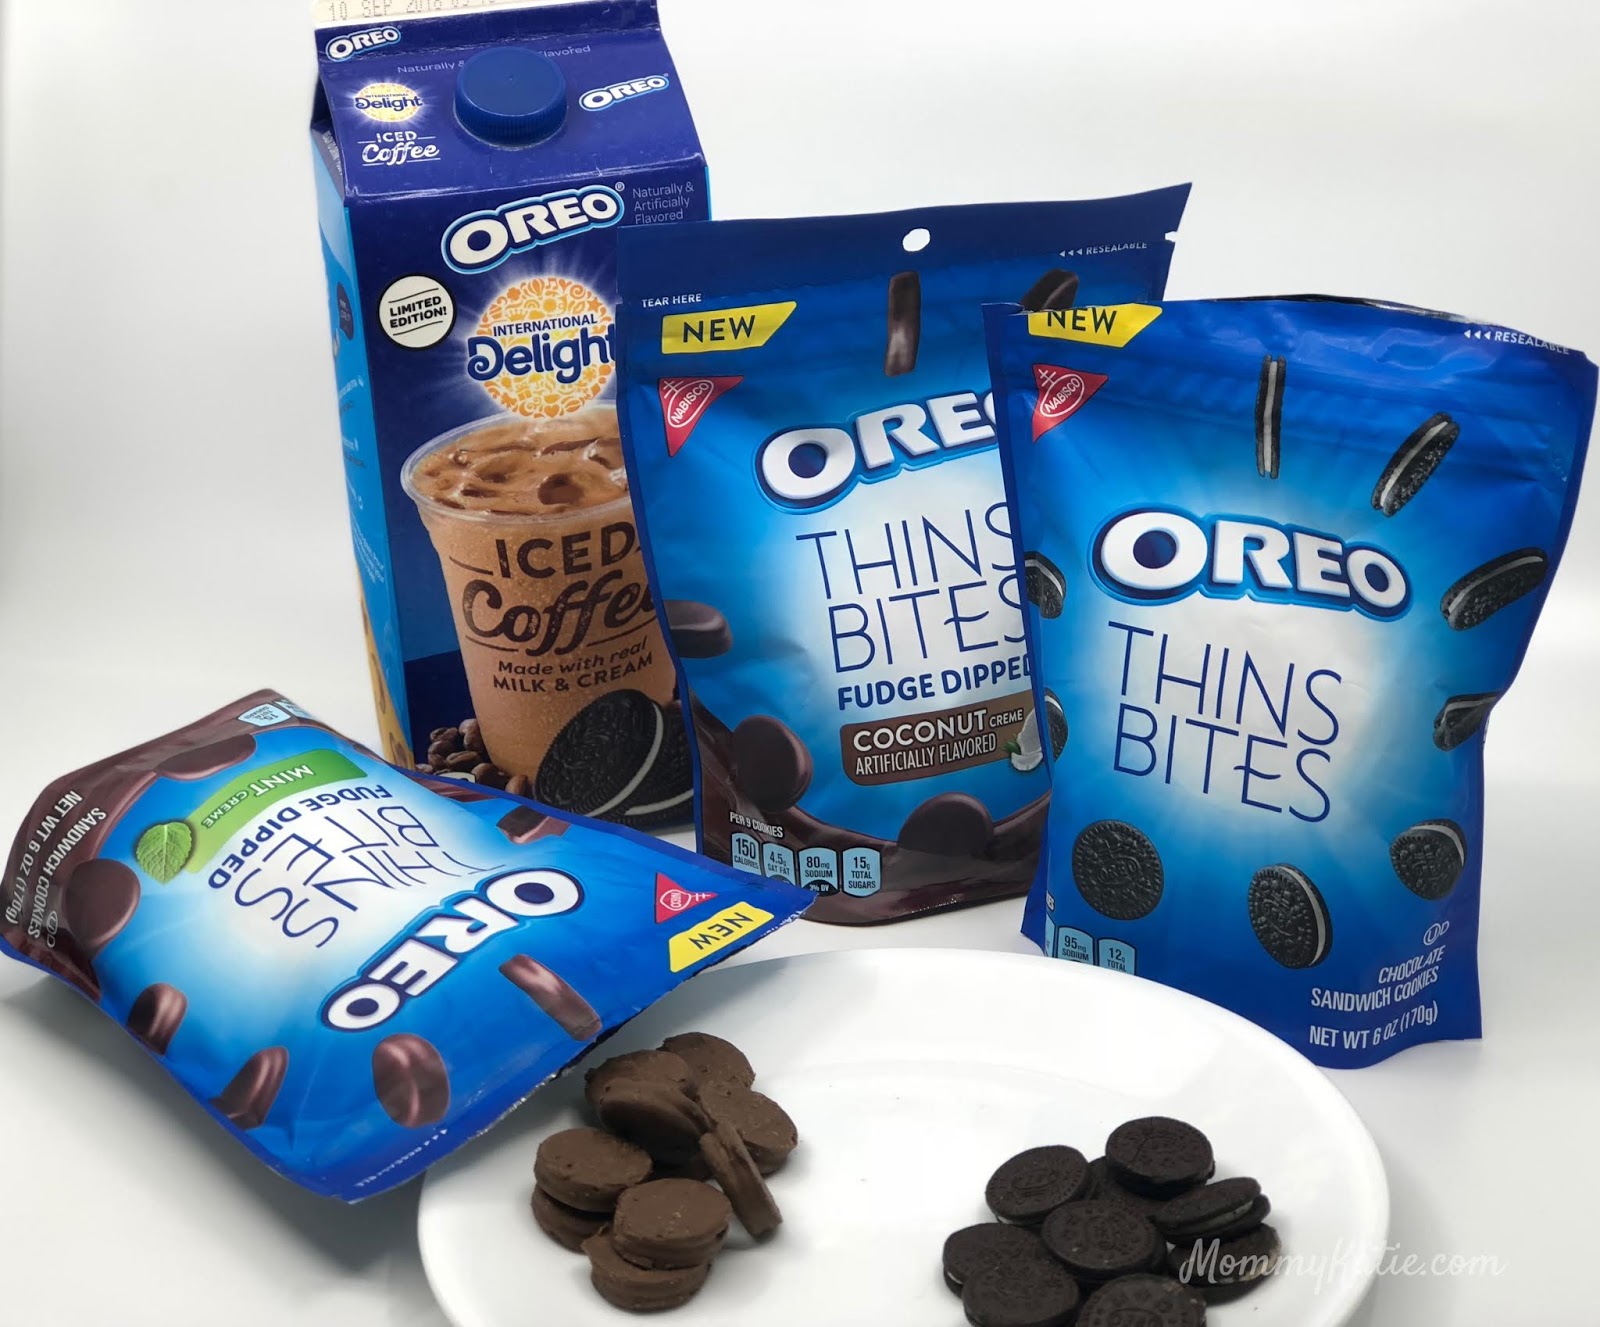 Oreo Thins Bites And Id Oreo Iced Coffee Walmart A Sweet Deal Mommy Katie - roblox song id for rocky balboa theme how to get free